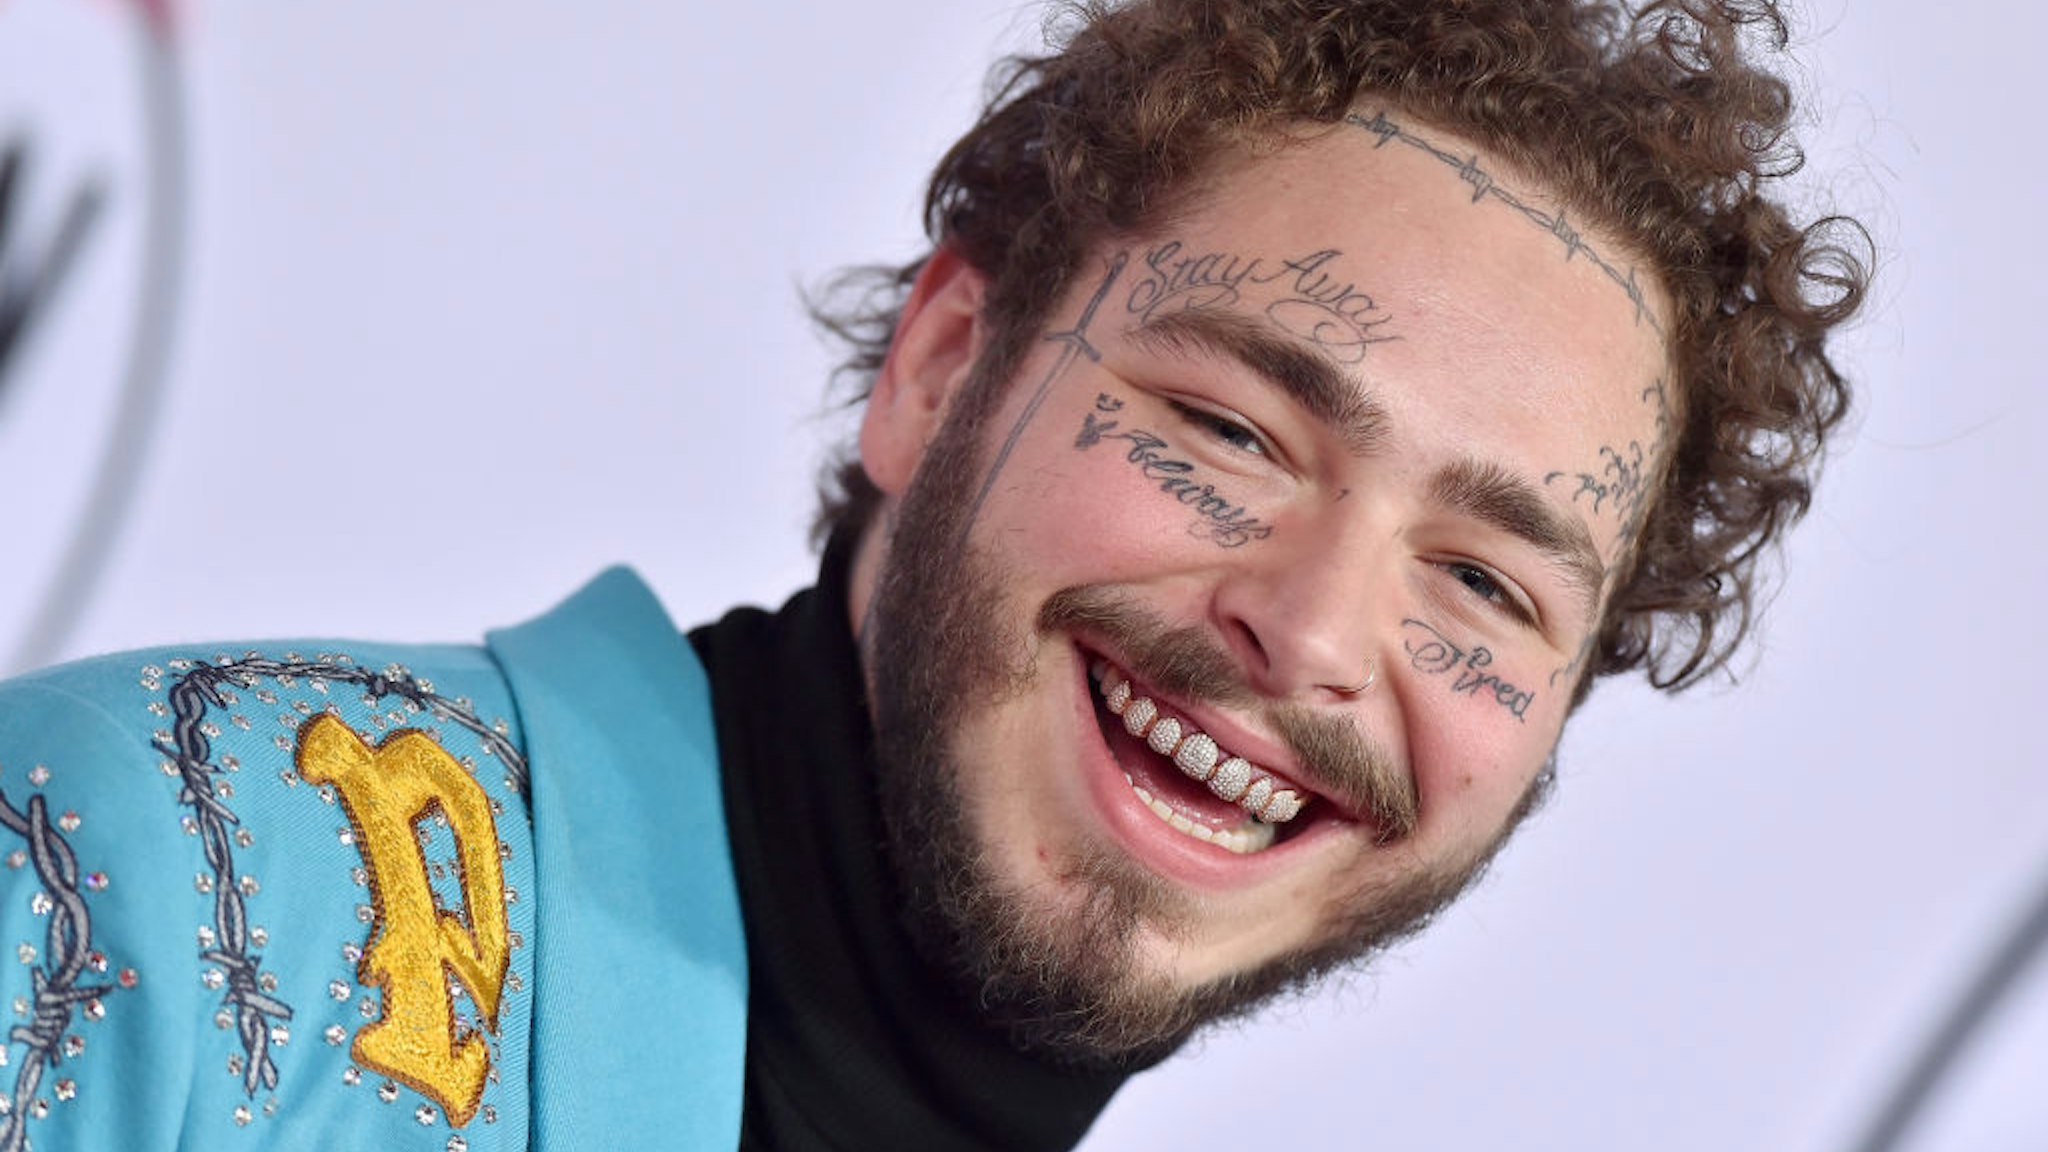 Post Malone attends the 2018 American Music Awards at Microsoft Theater on October 9, 2018 in Los Angeles, California